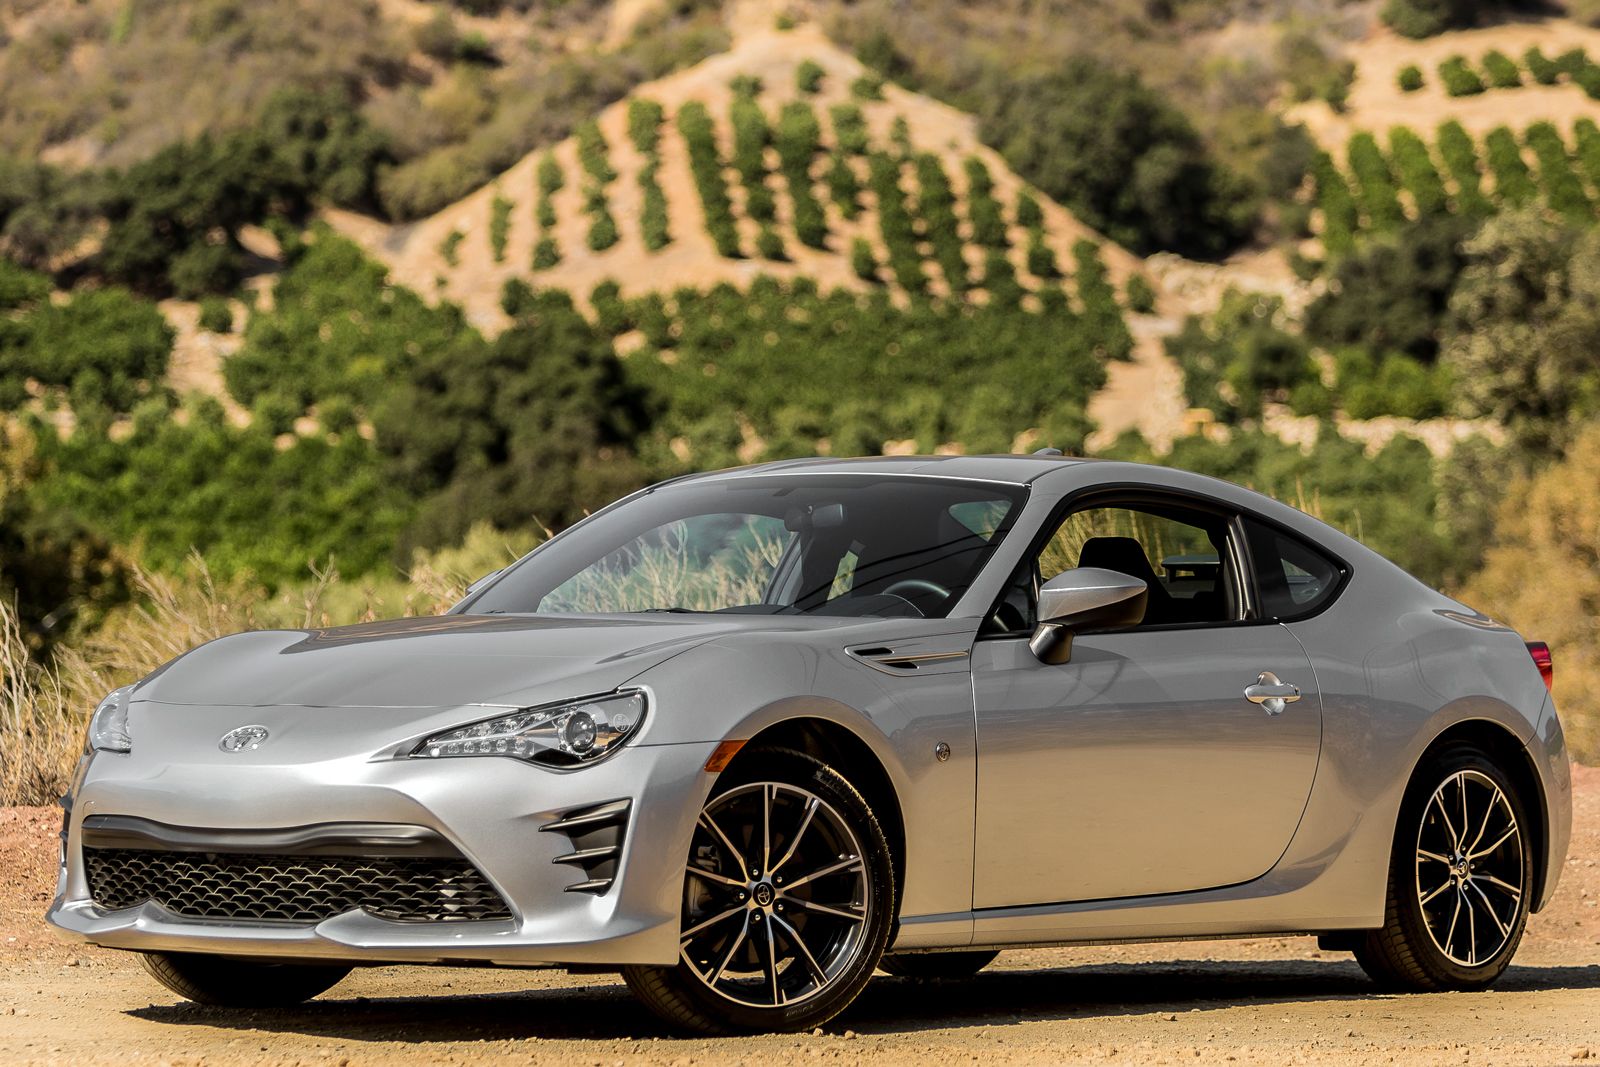 Steel 2017 Toyota 86 parked on the dirt